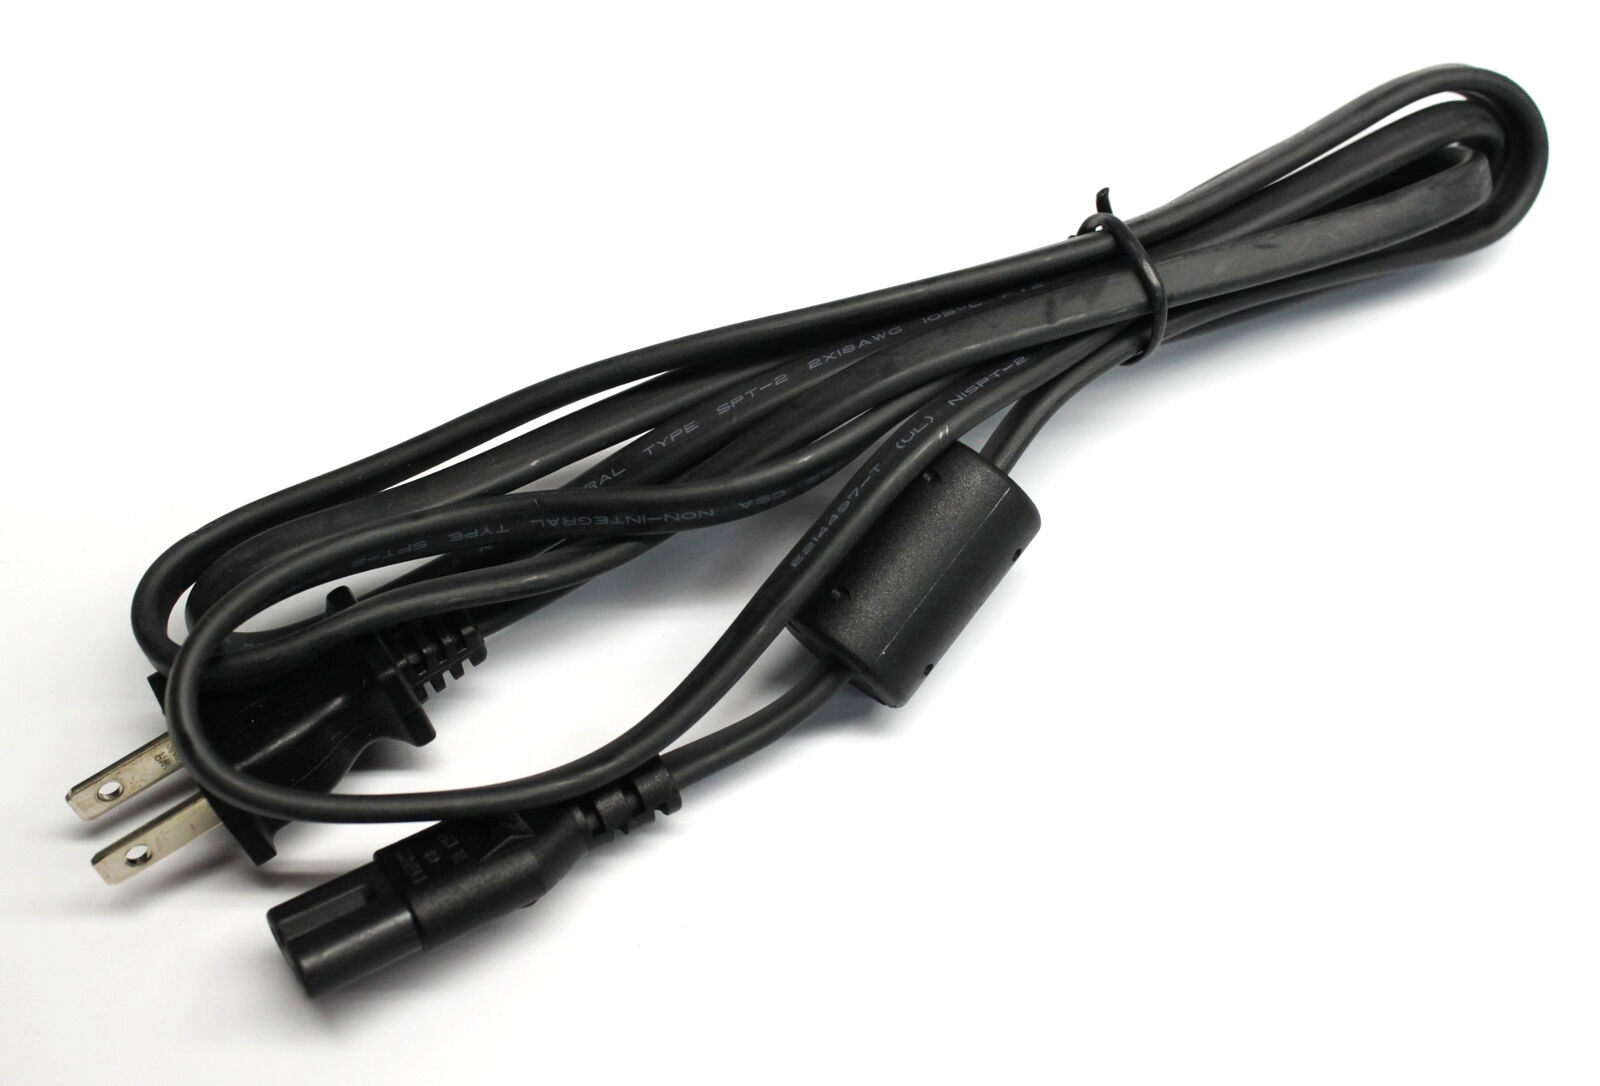 AC Power Cable X02105-001#0513 2 Prong Non-Integral Type SPT-2 Cord Black